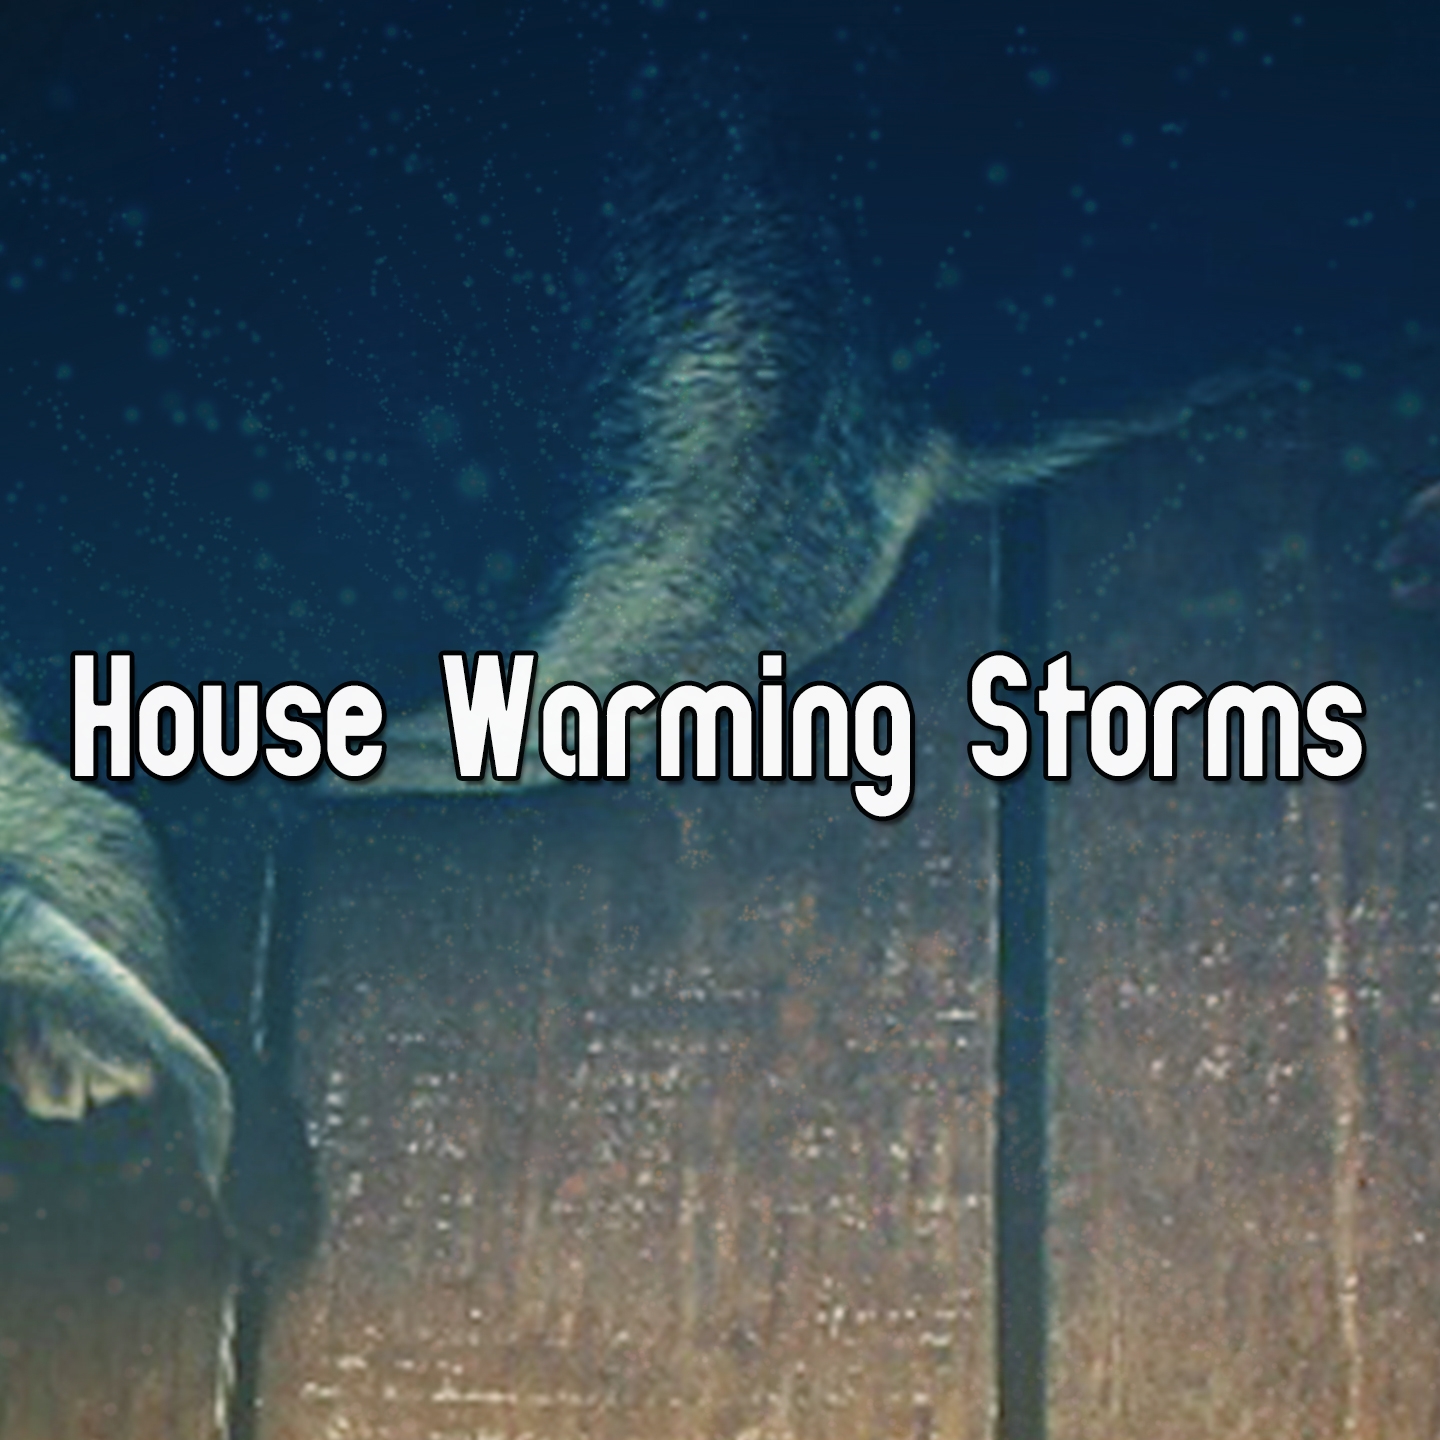 House Warming Storms